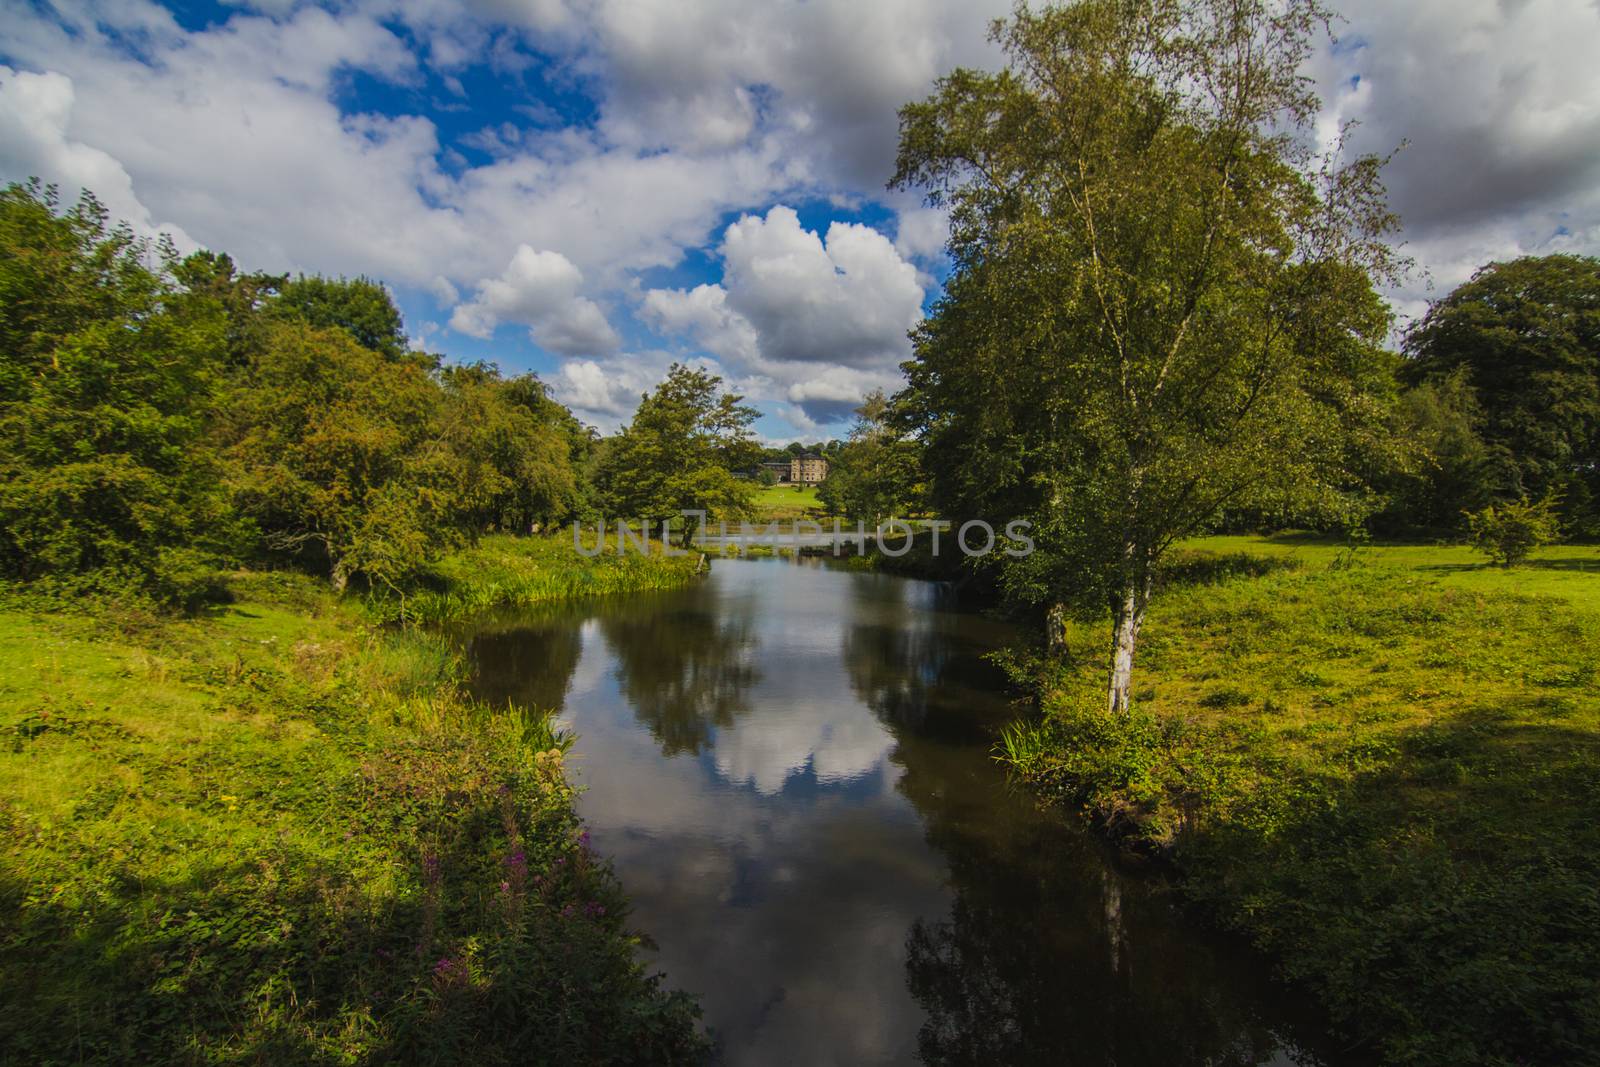 The English Countryside River by samULvisuals